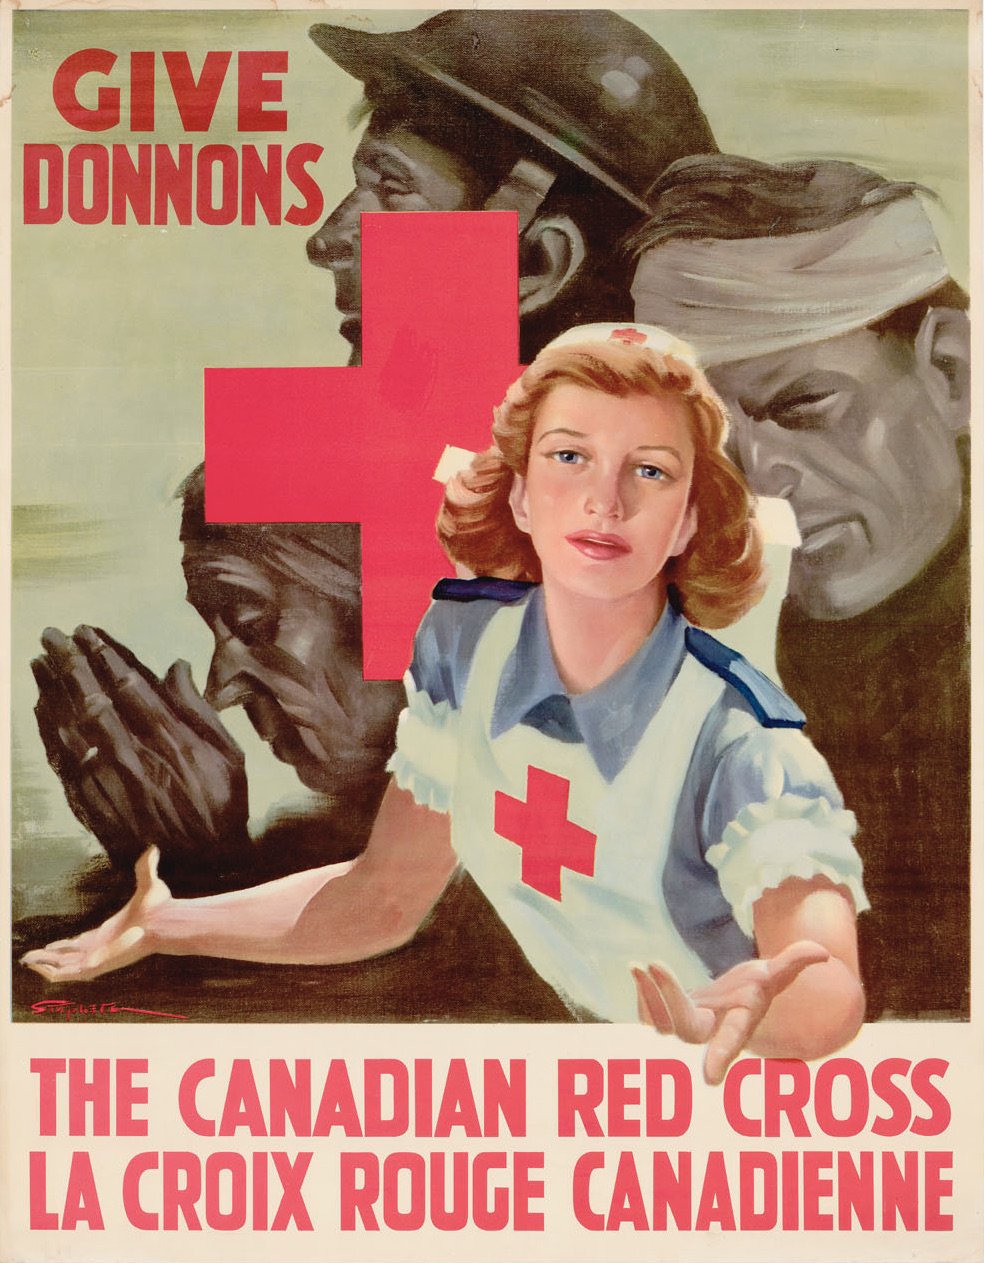  Canadian Red Cross Wartime Poster, circa 1939-1945.  Credit: Library and Archives Canada, Acc. No. R1300-33. 